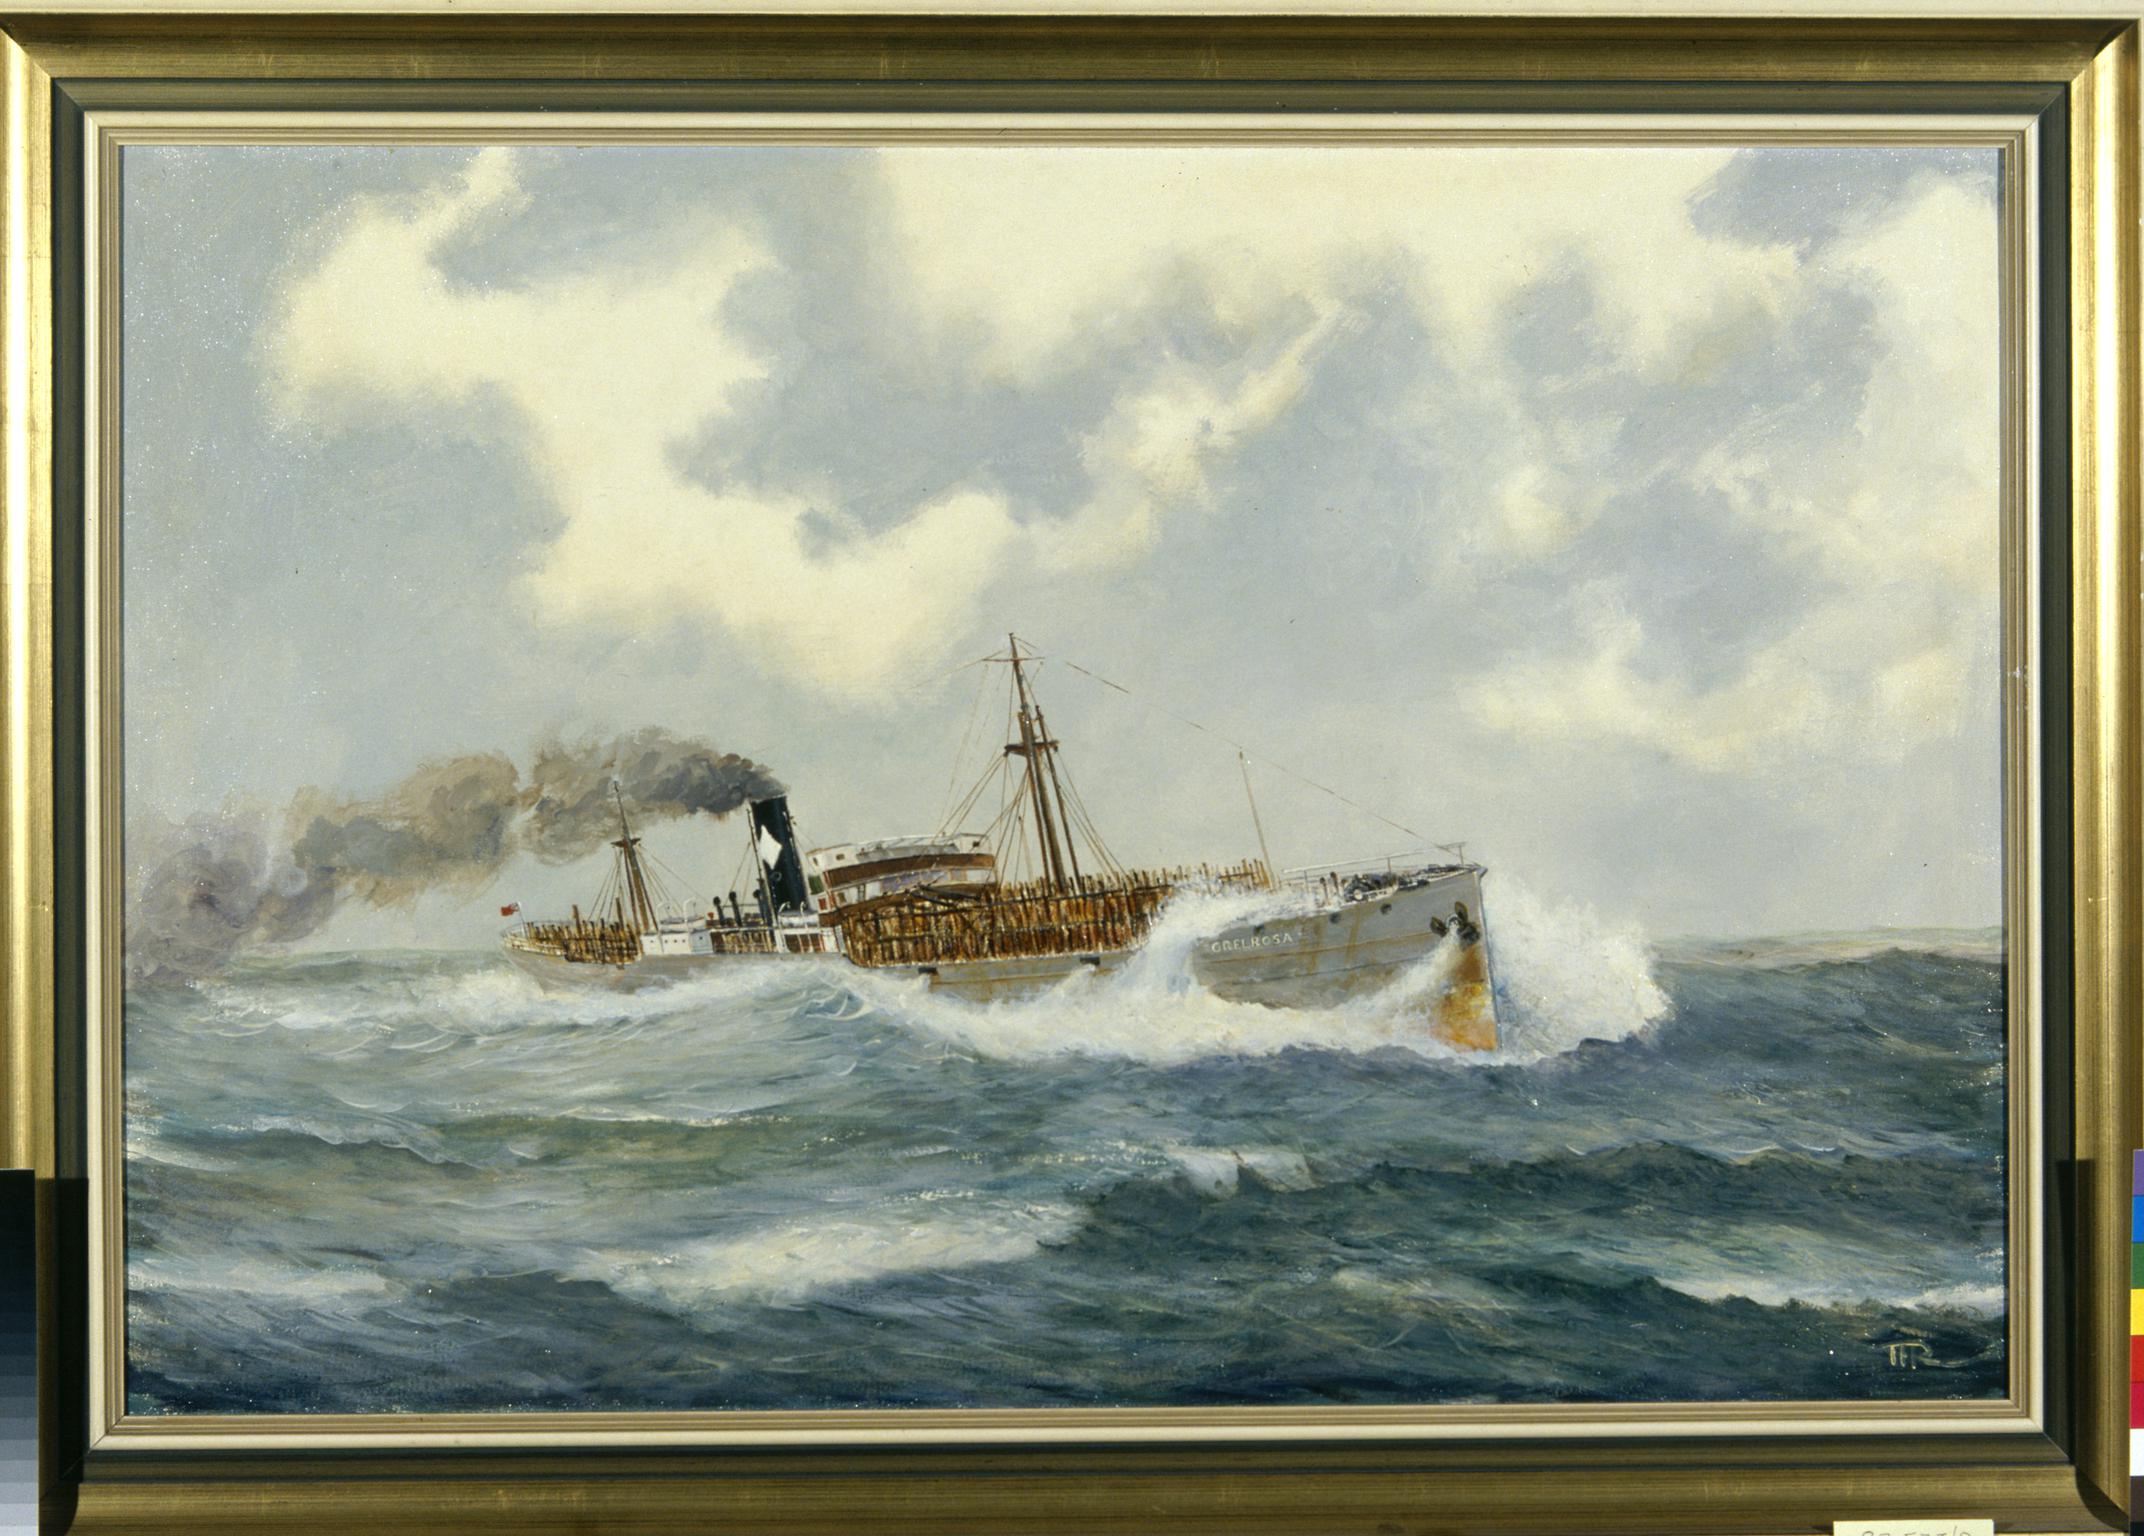 S.S. GRELROSA (painting)